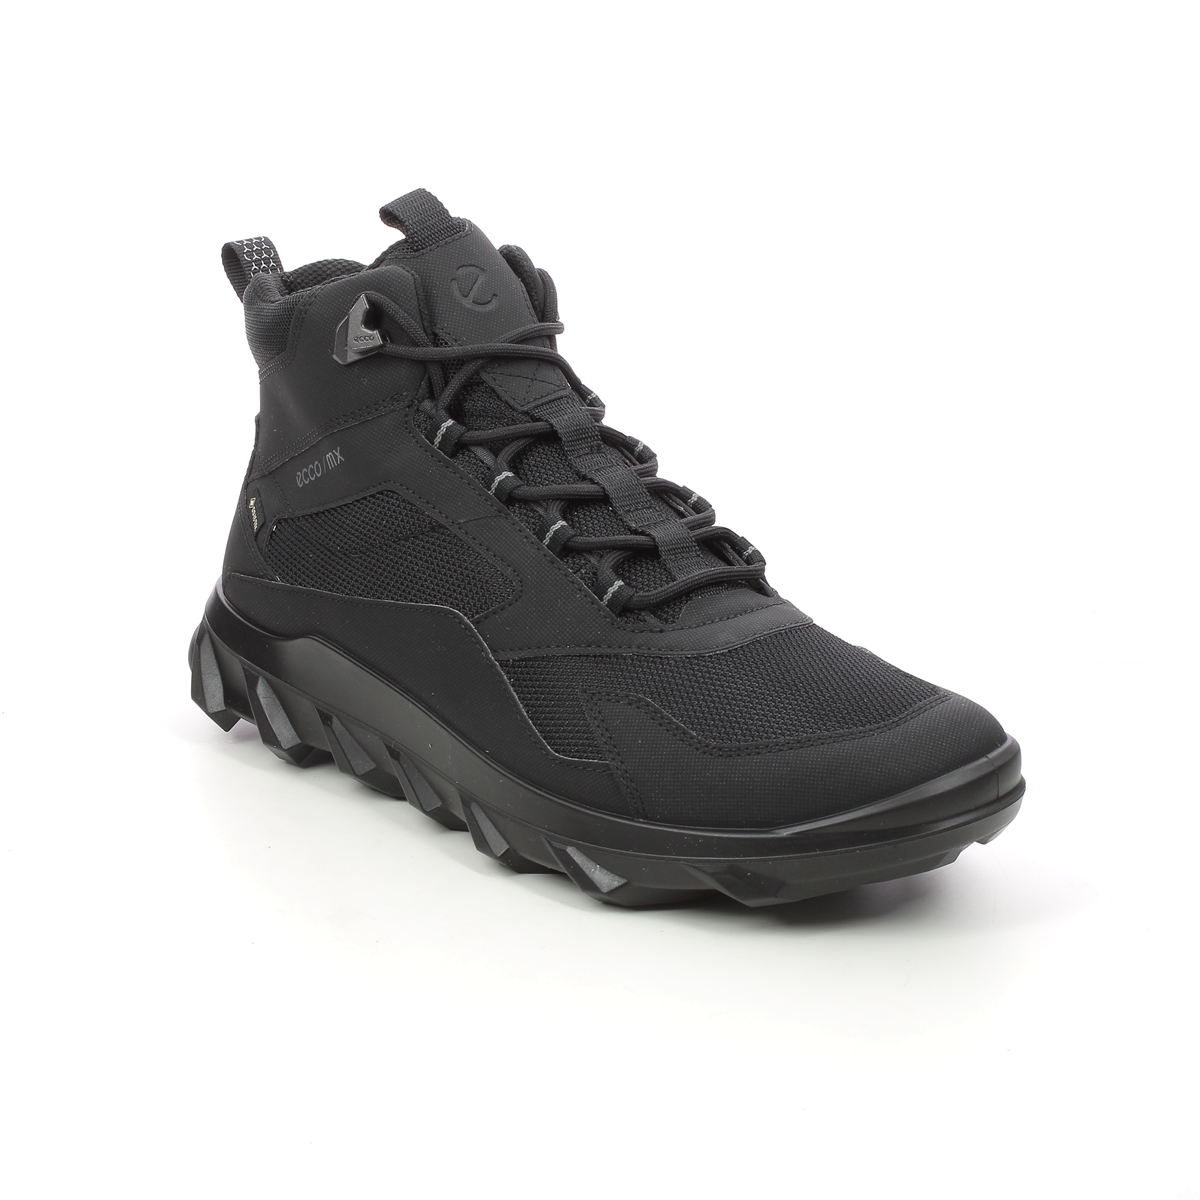 Ecco Mx Mid Mens Boot Gtx Black Mens Outdoor Walking Boots 820224-51052 In Size 43 In Plain Black